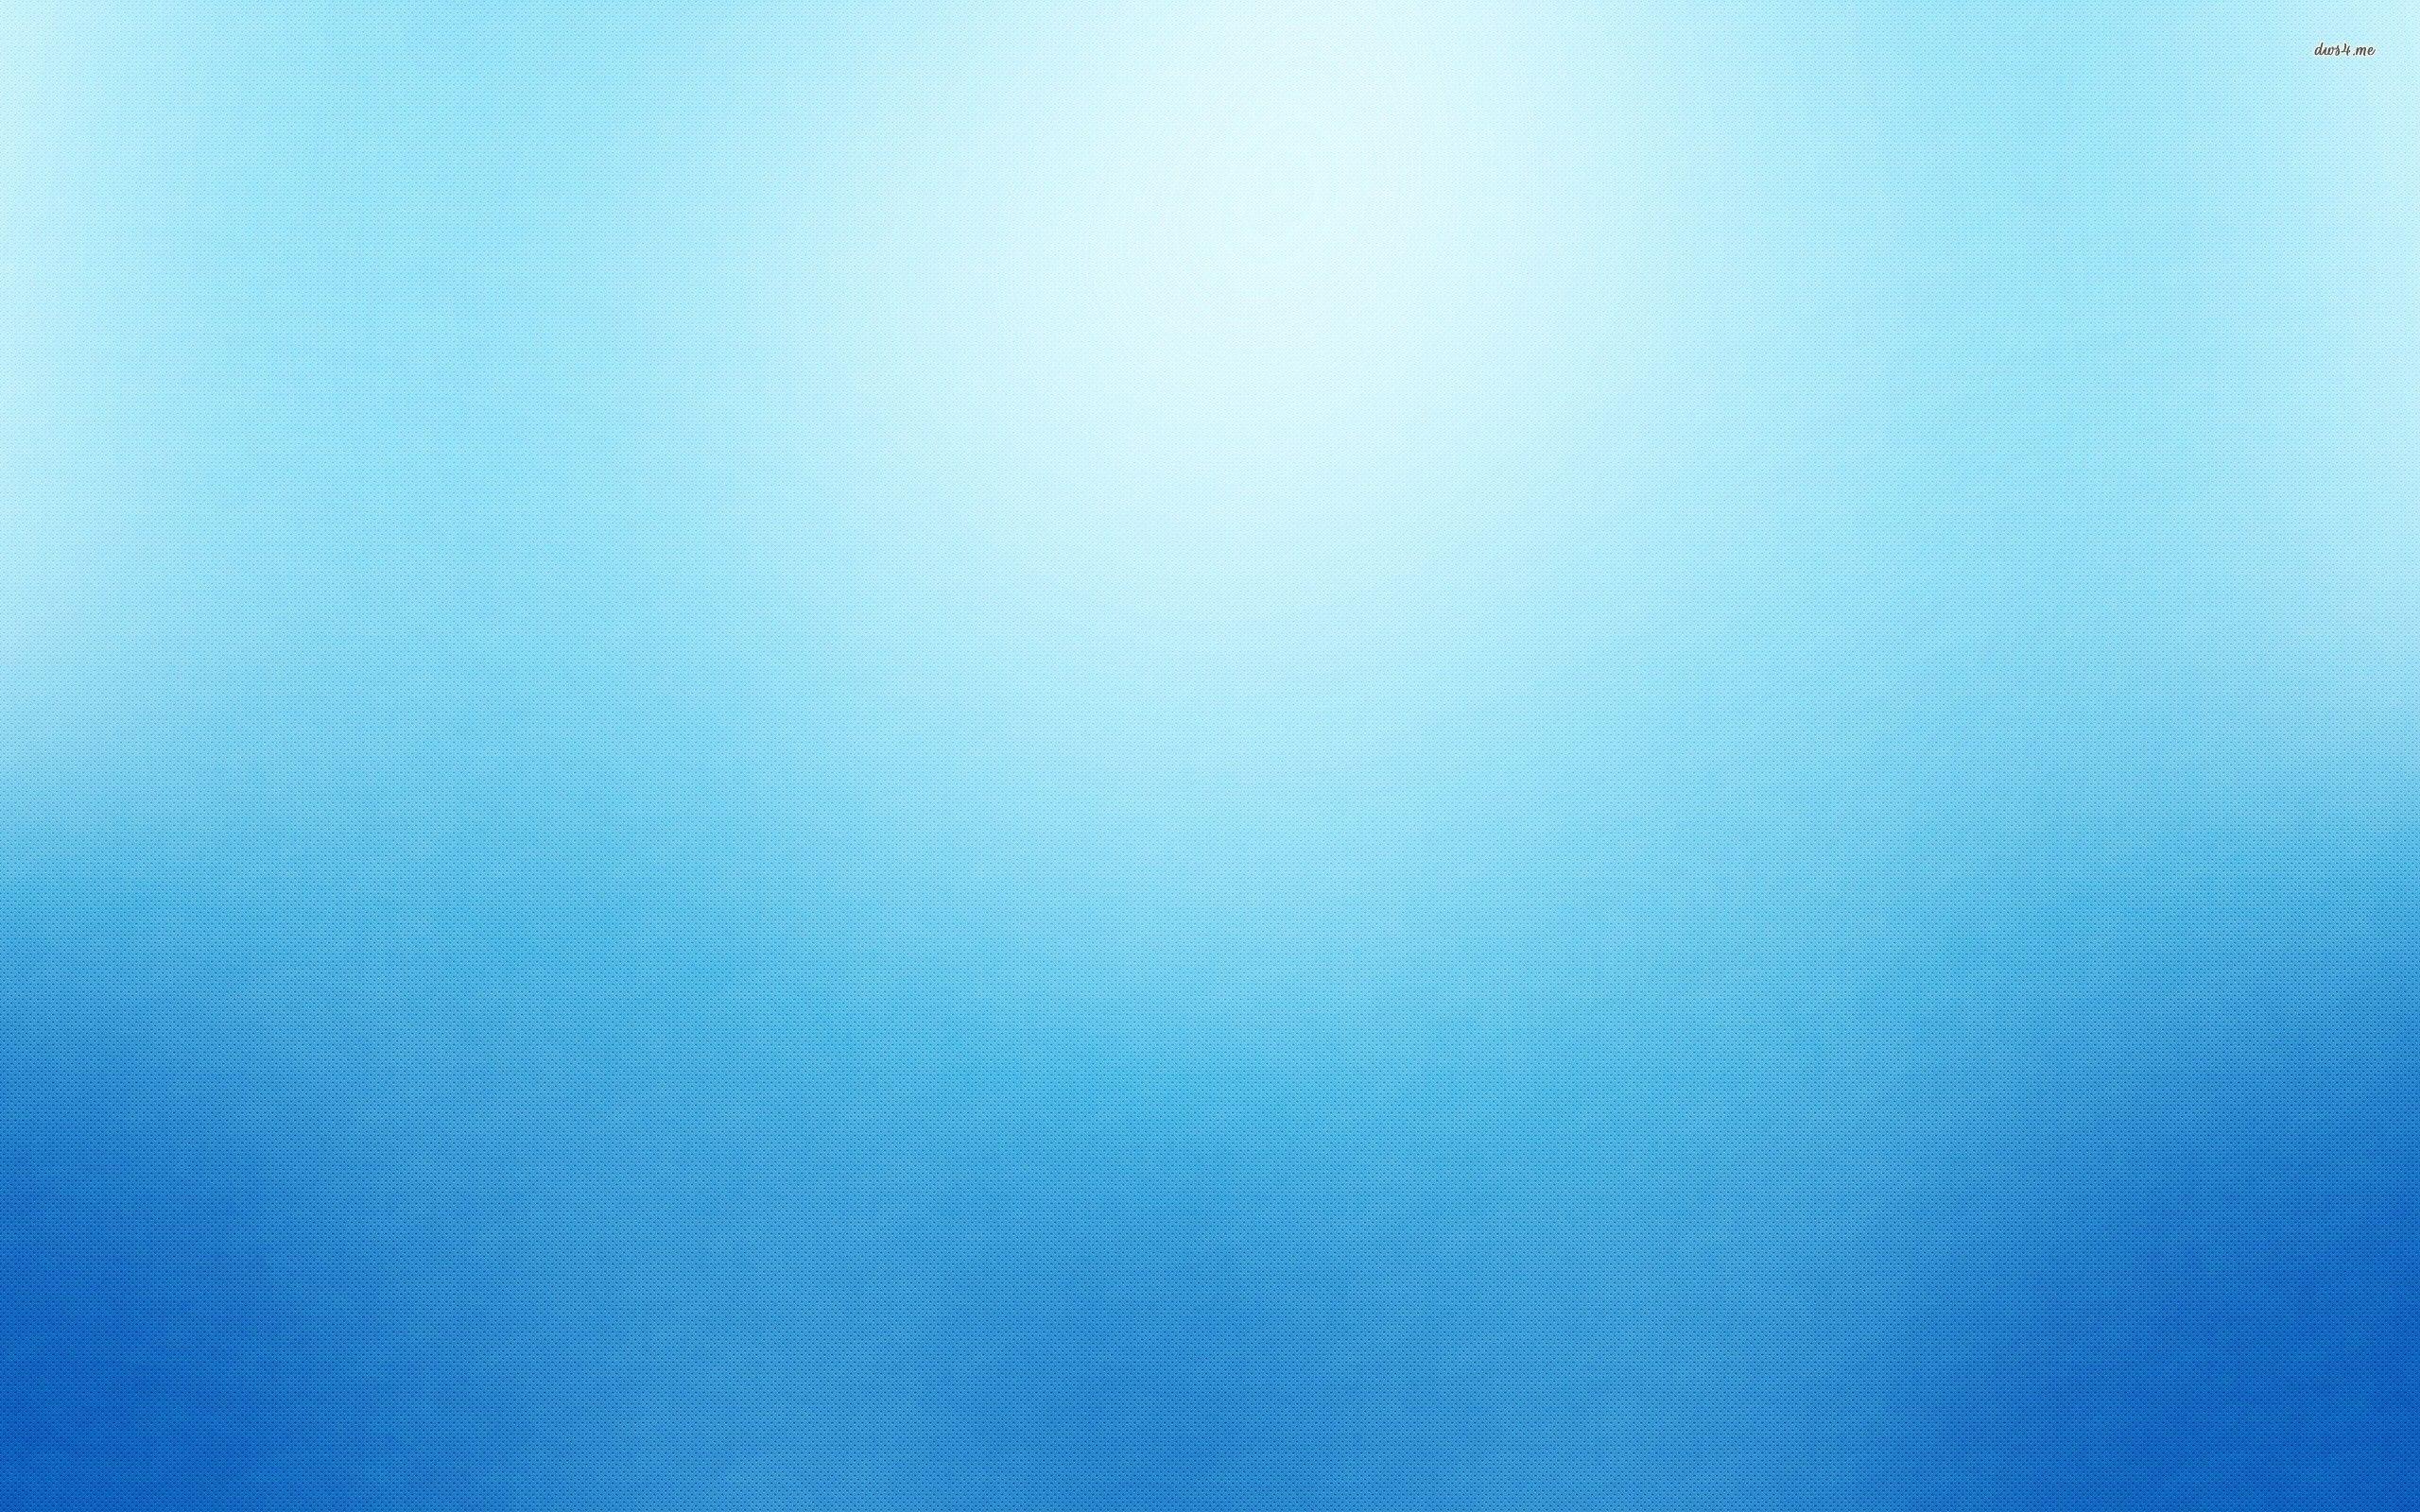 sky blue background texture 10. Background Check All